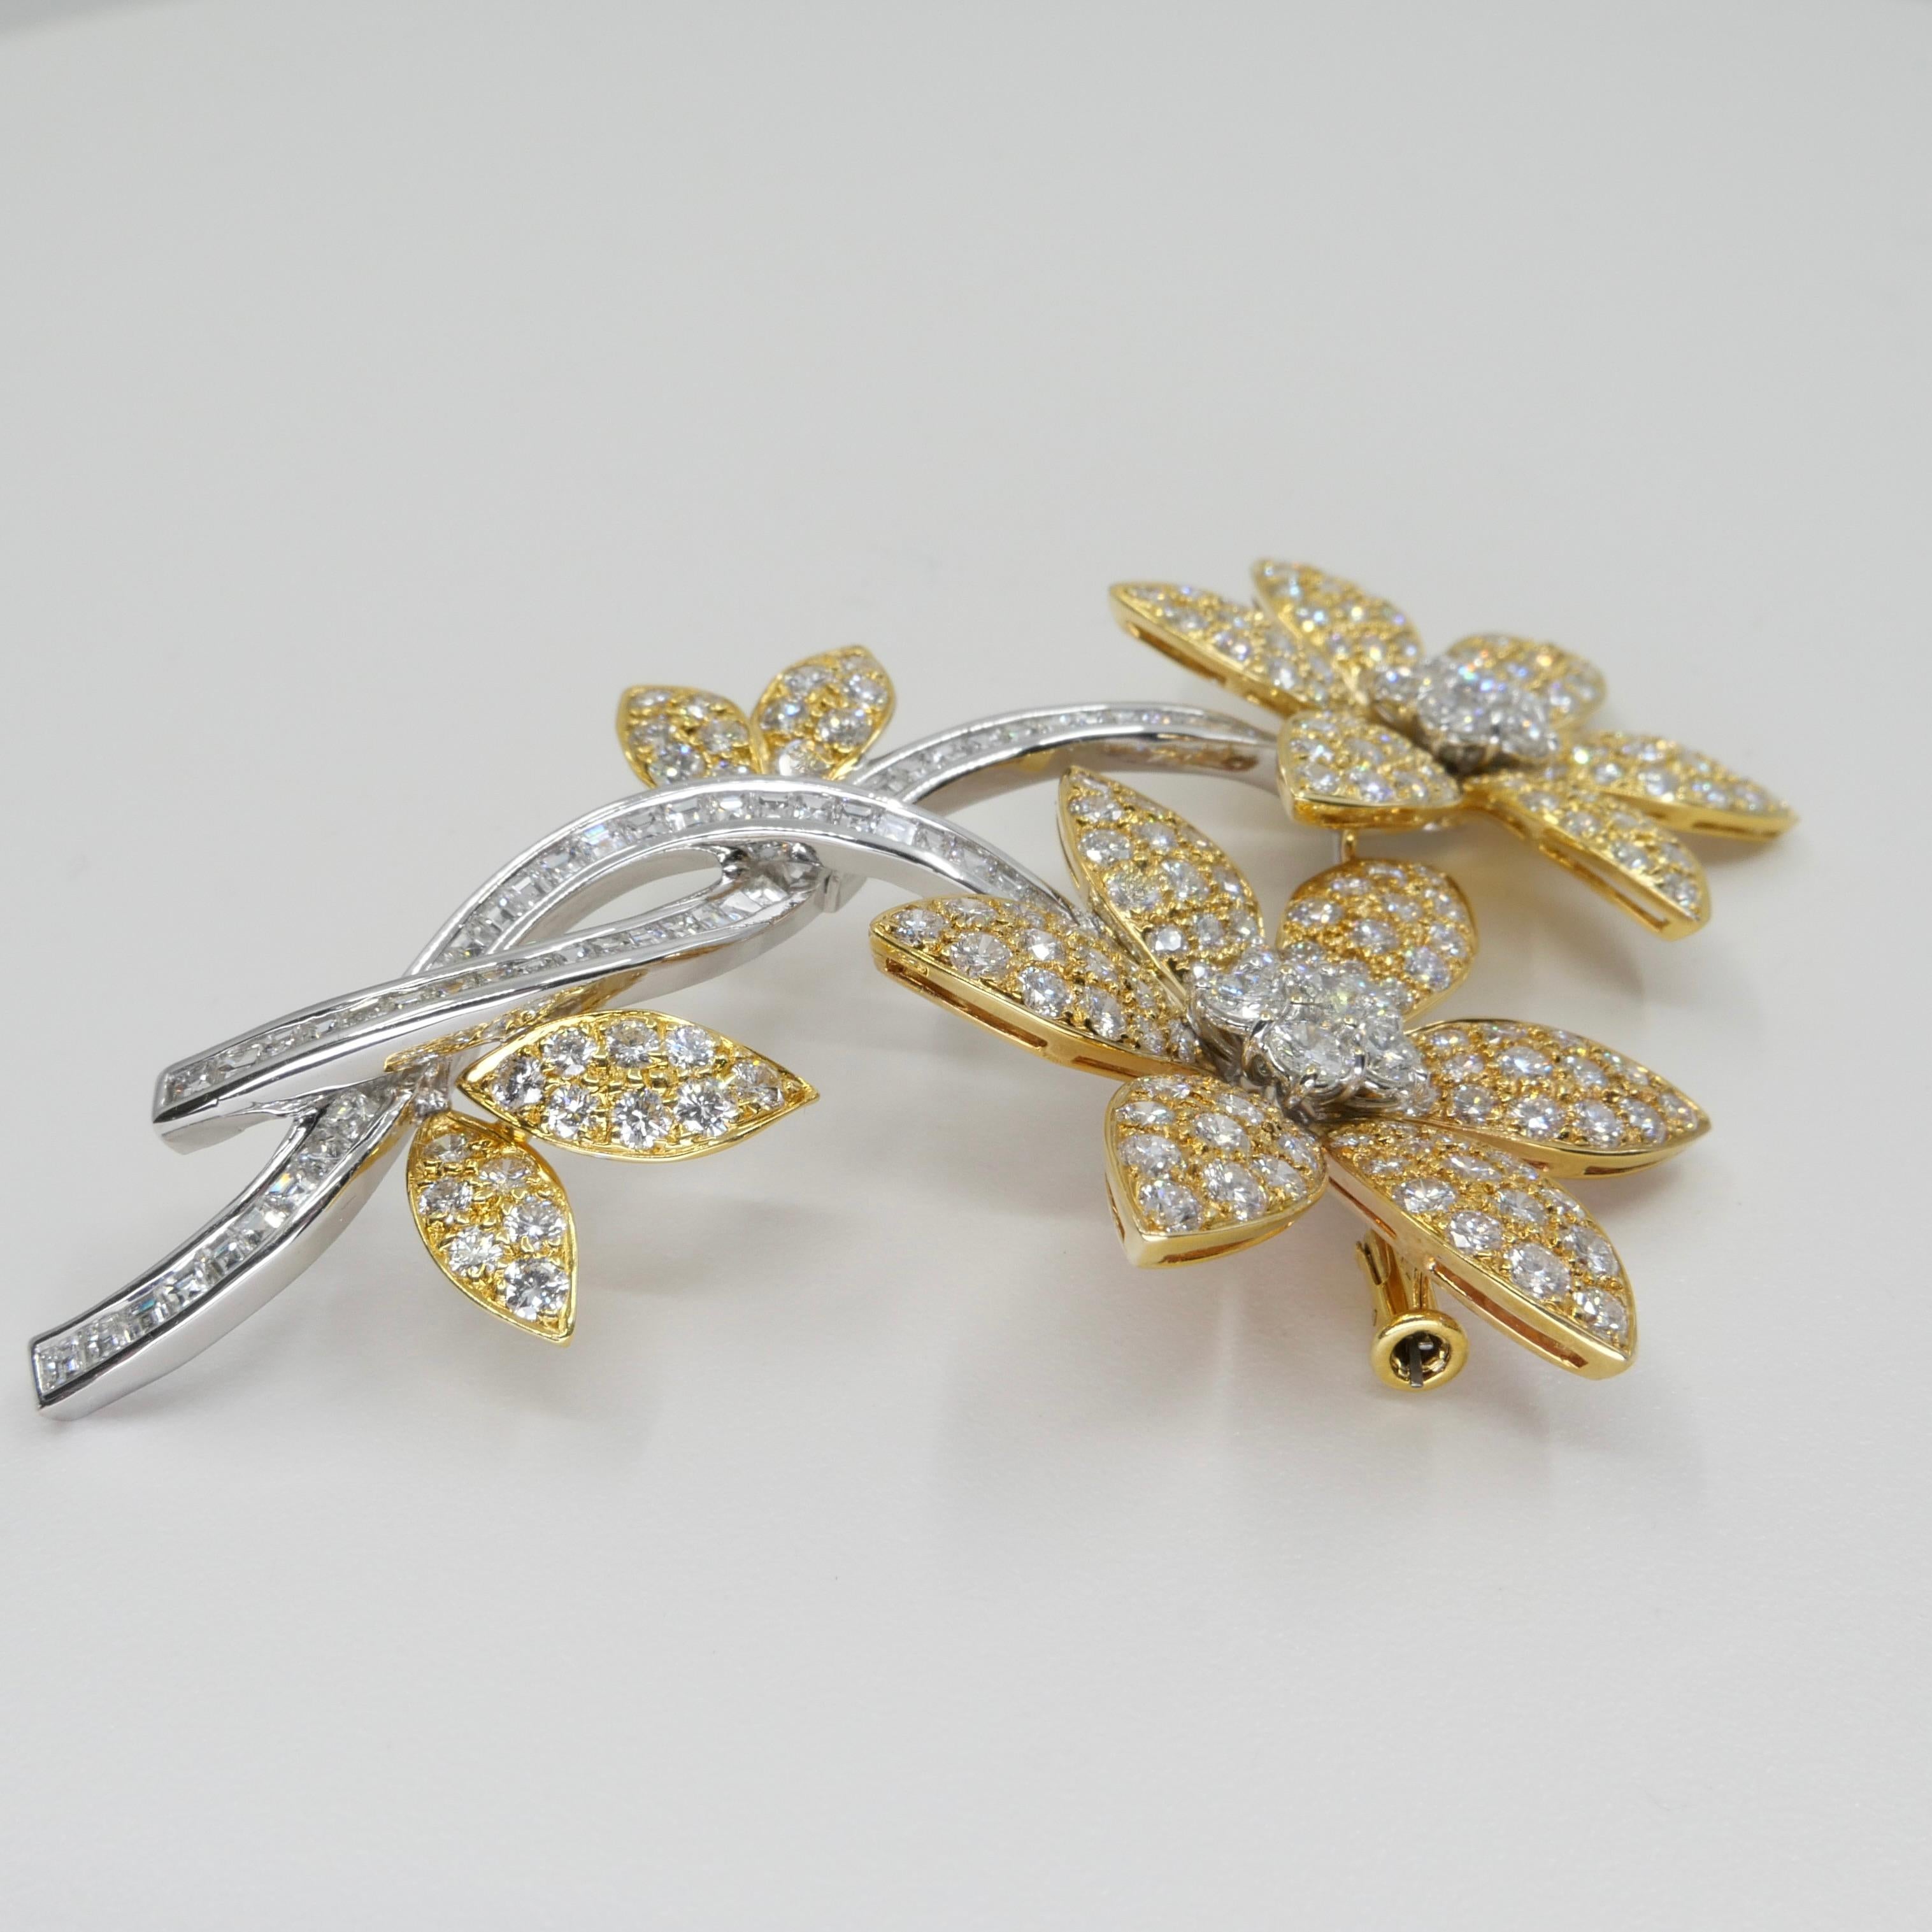 Two Tone Gold & 7.81 Ctw Diamond Flower Statement Brooch Pendant, Two Use For Sale 11